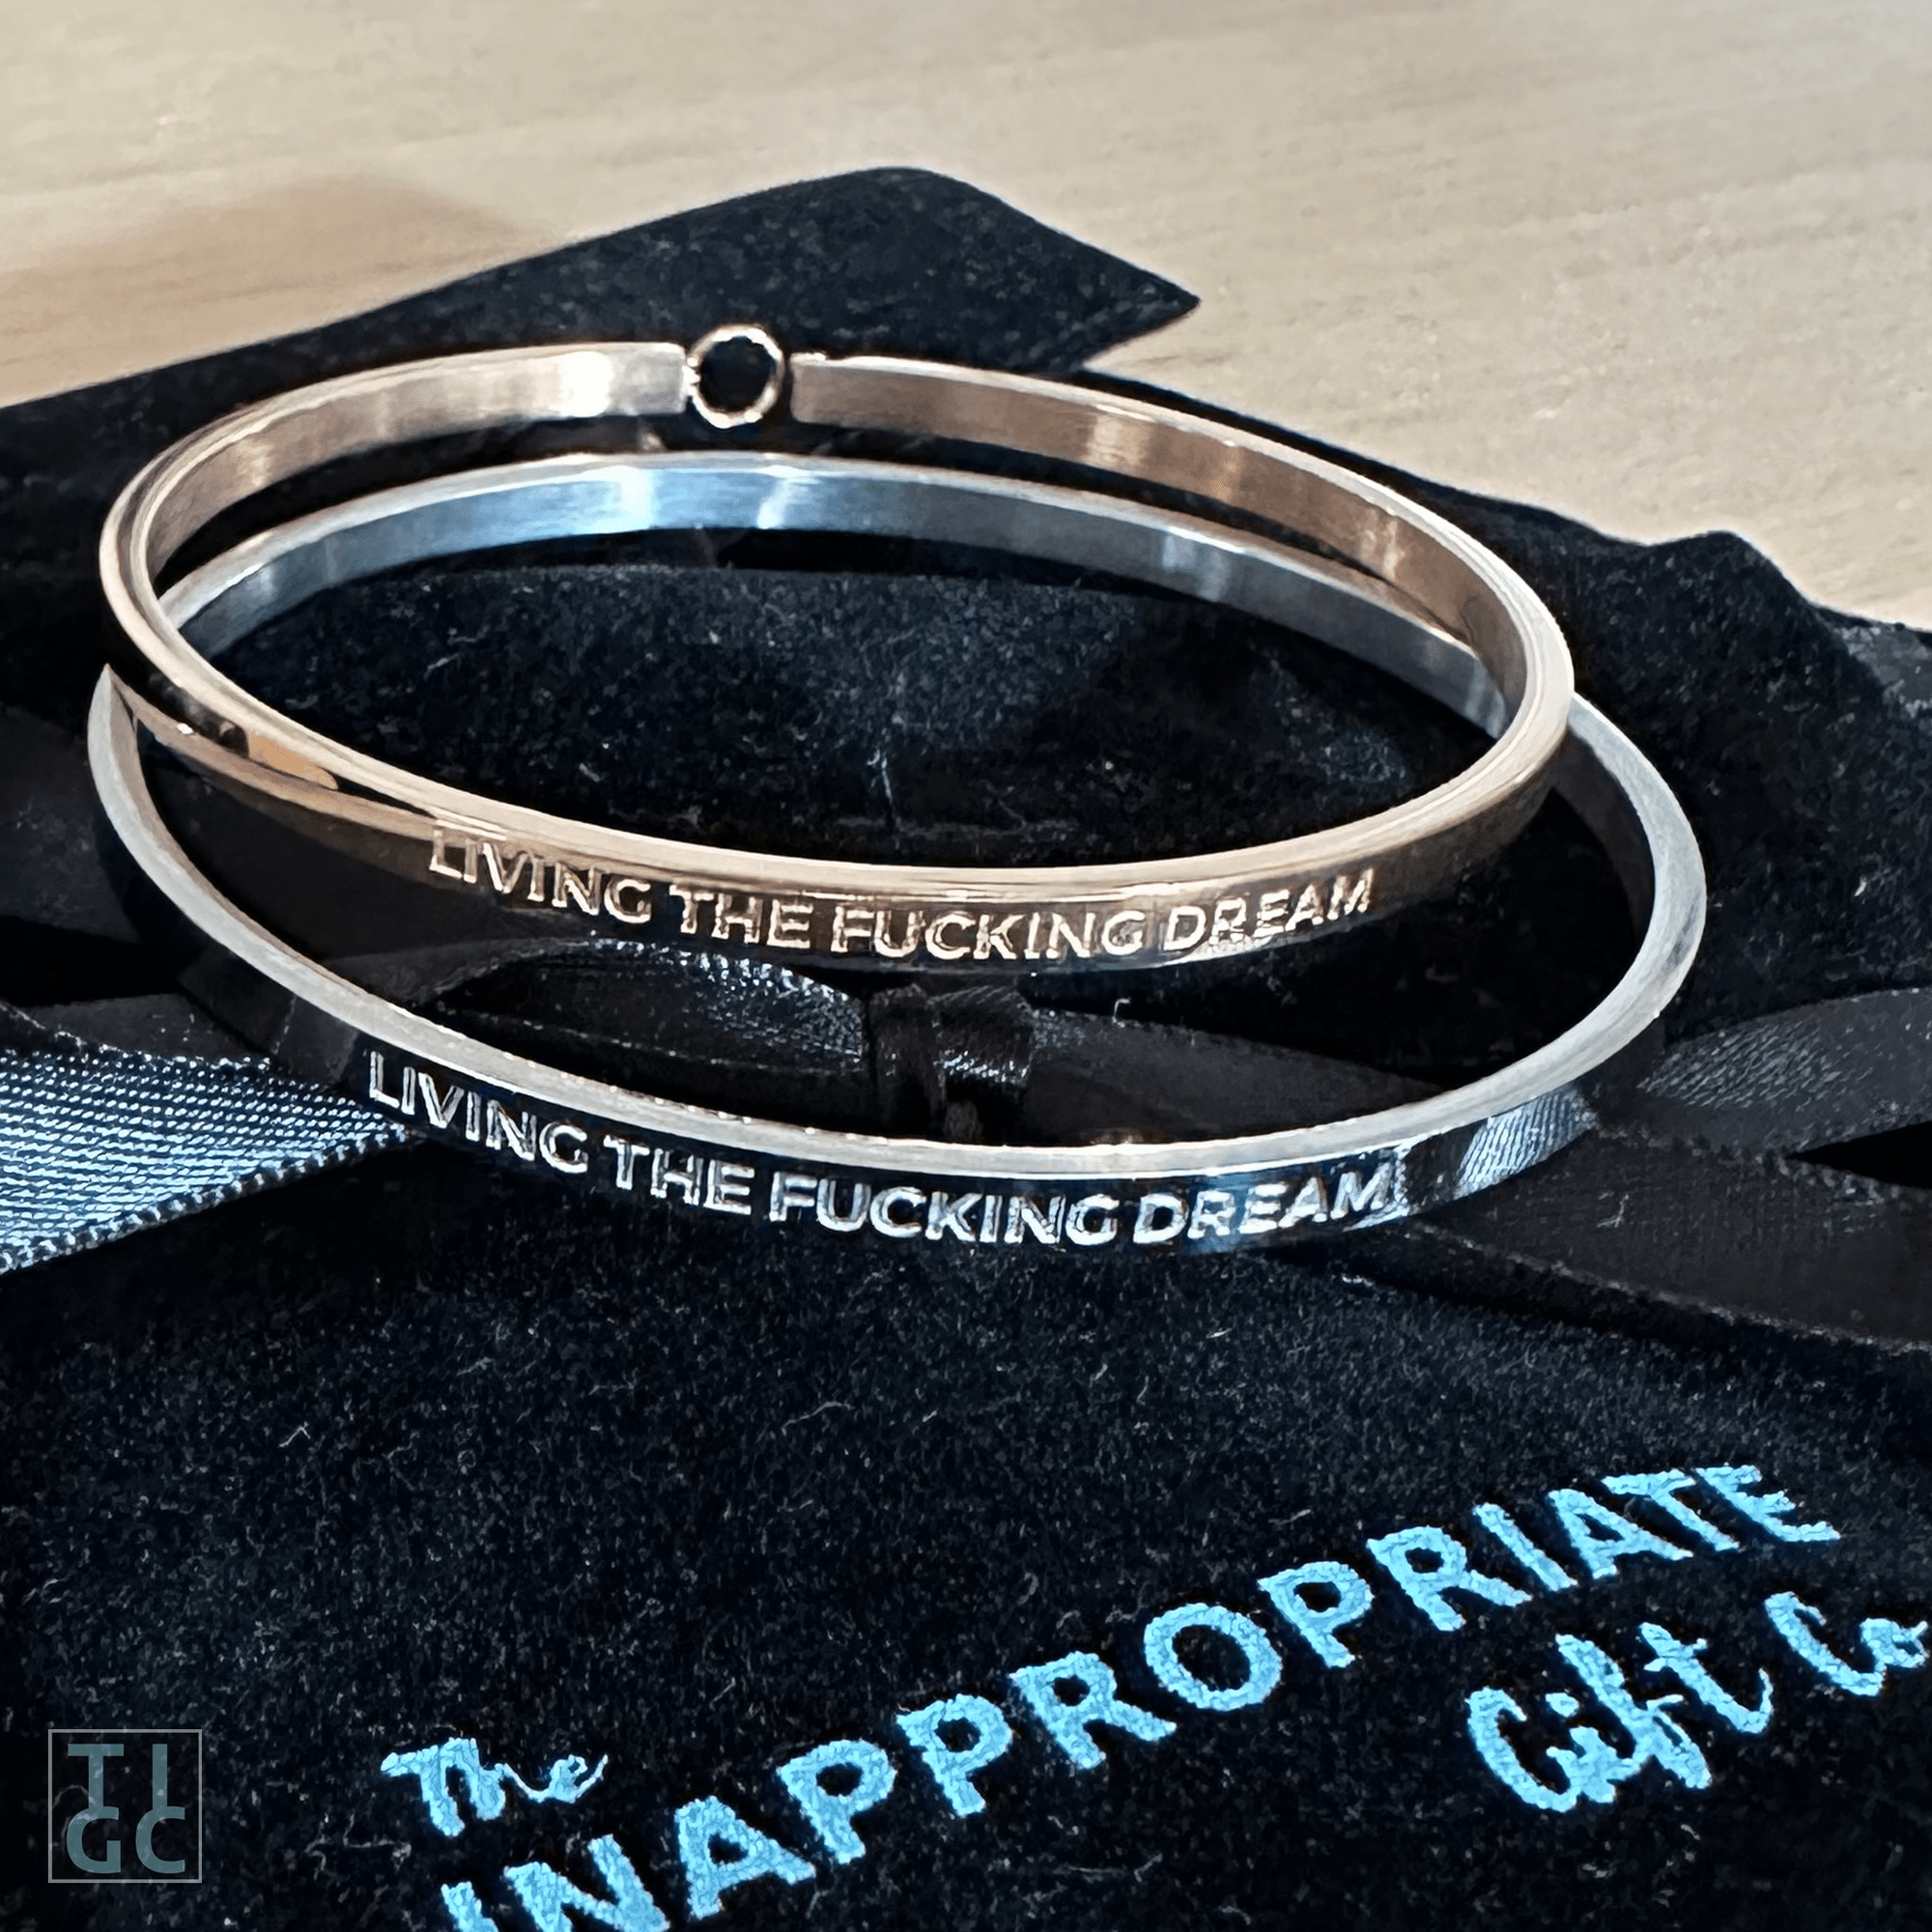 TIGC The Inappropriate Gift Co Living The Fucking Dream Bangle